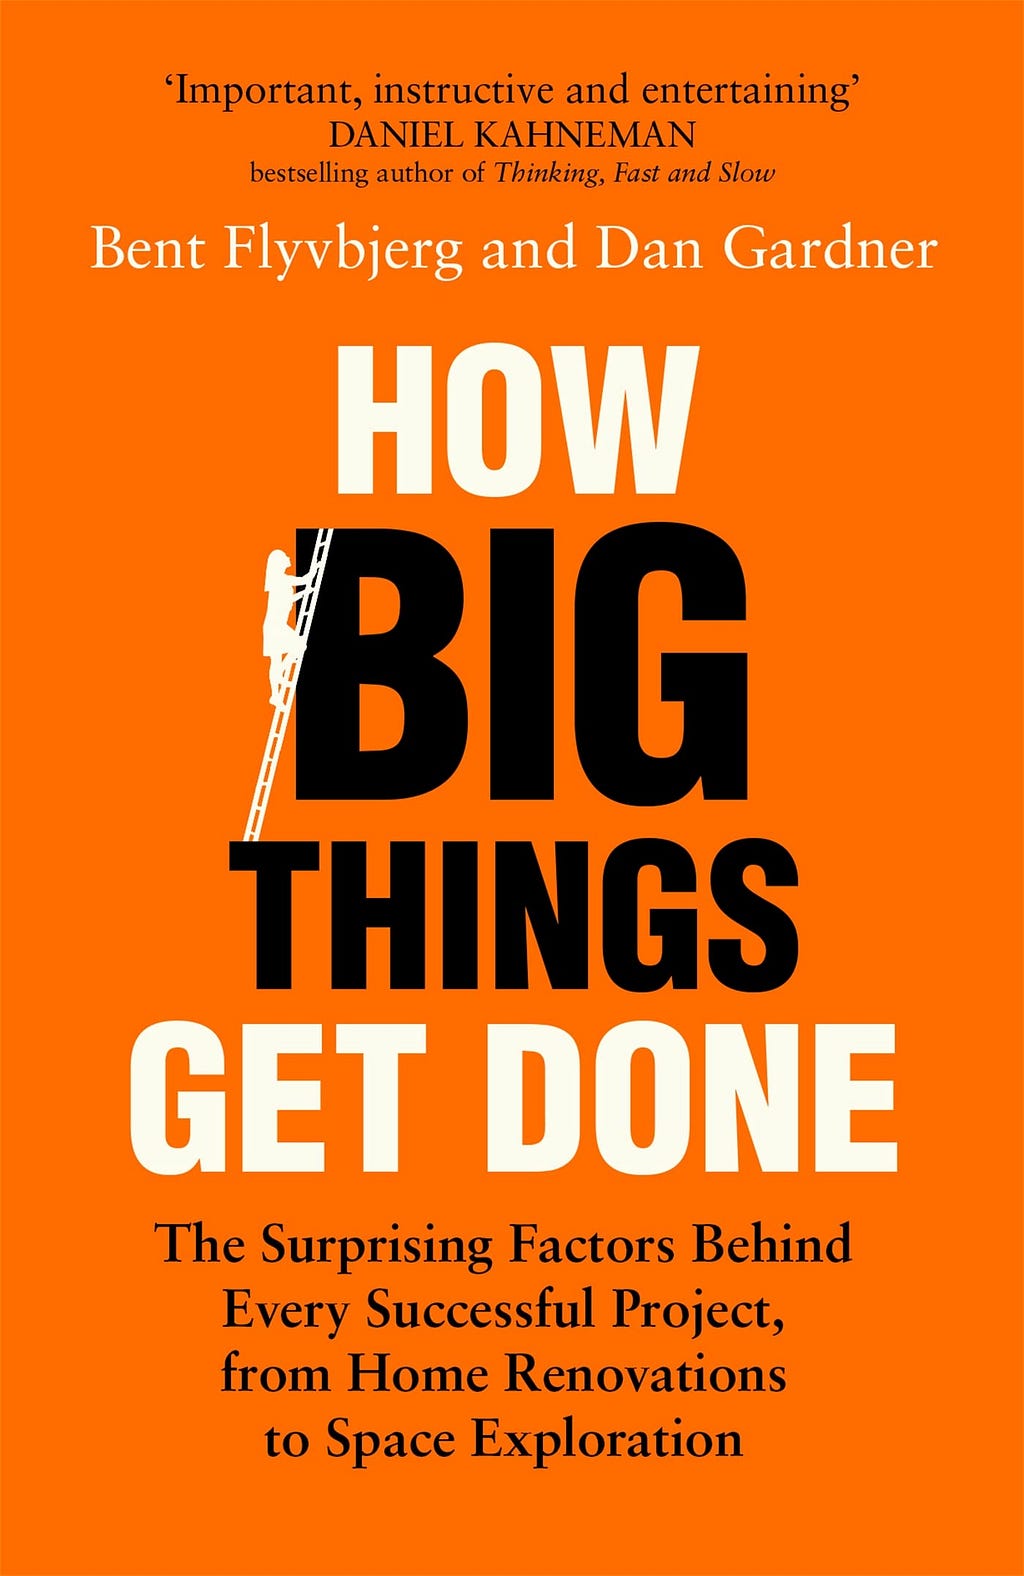 Cover of the book ‘How Big Things Get Done’